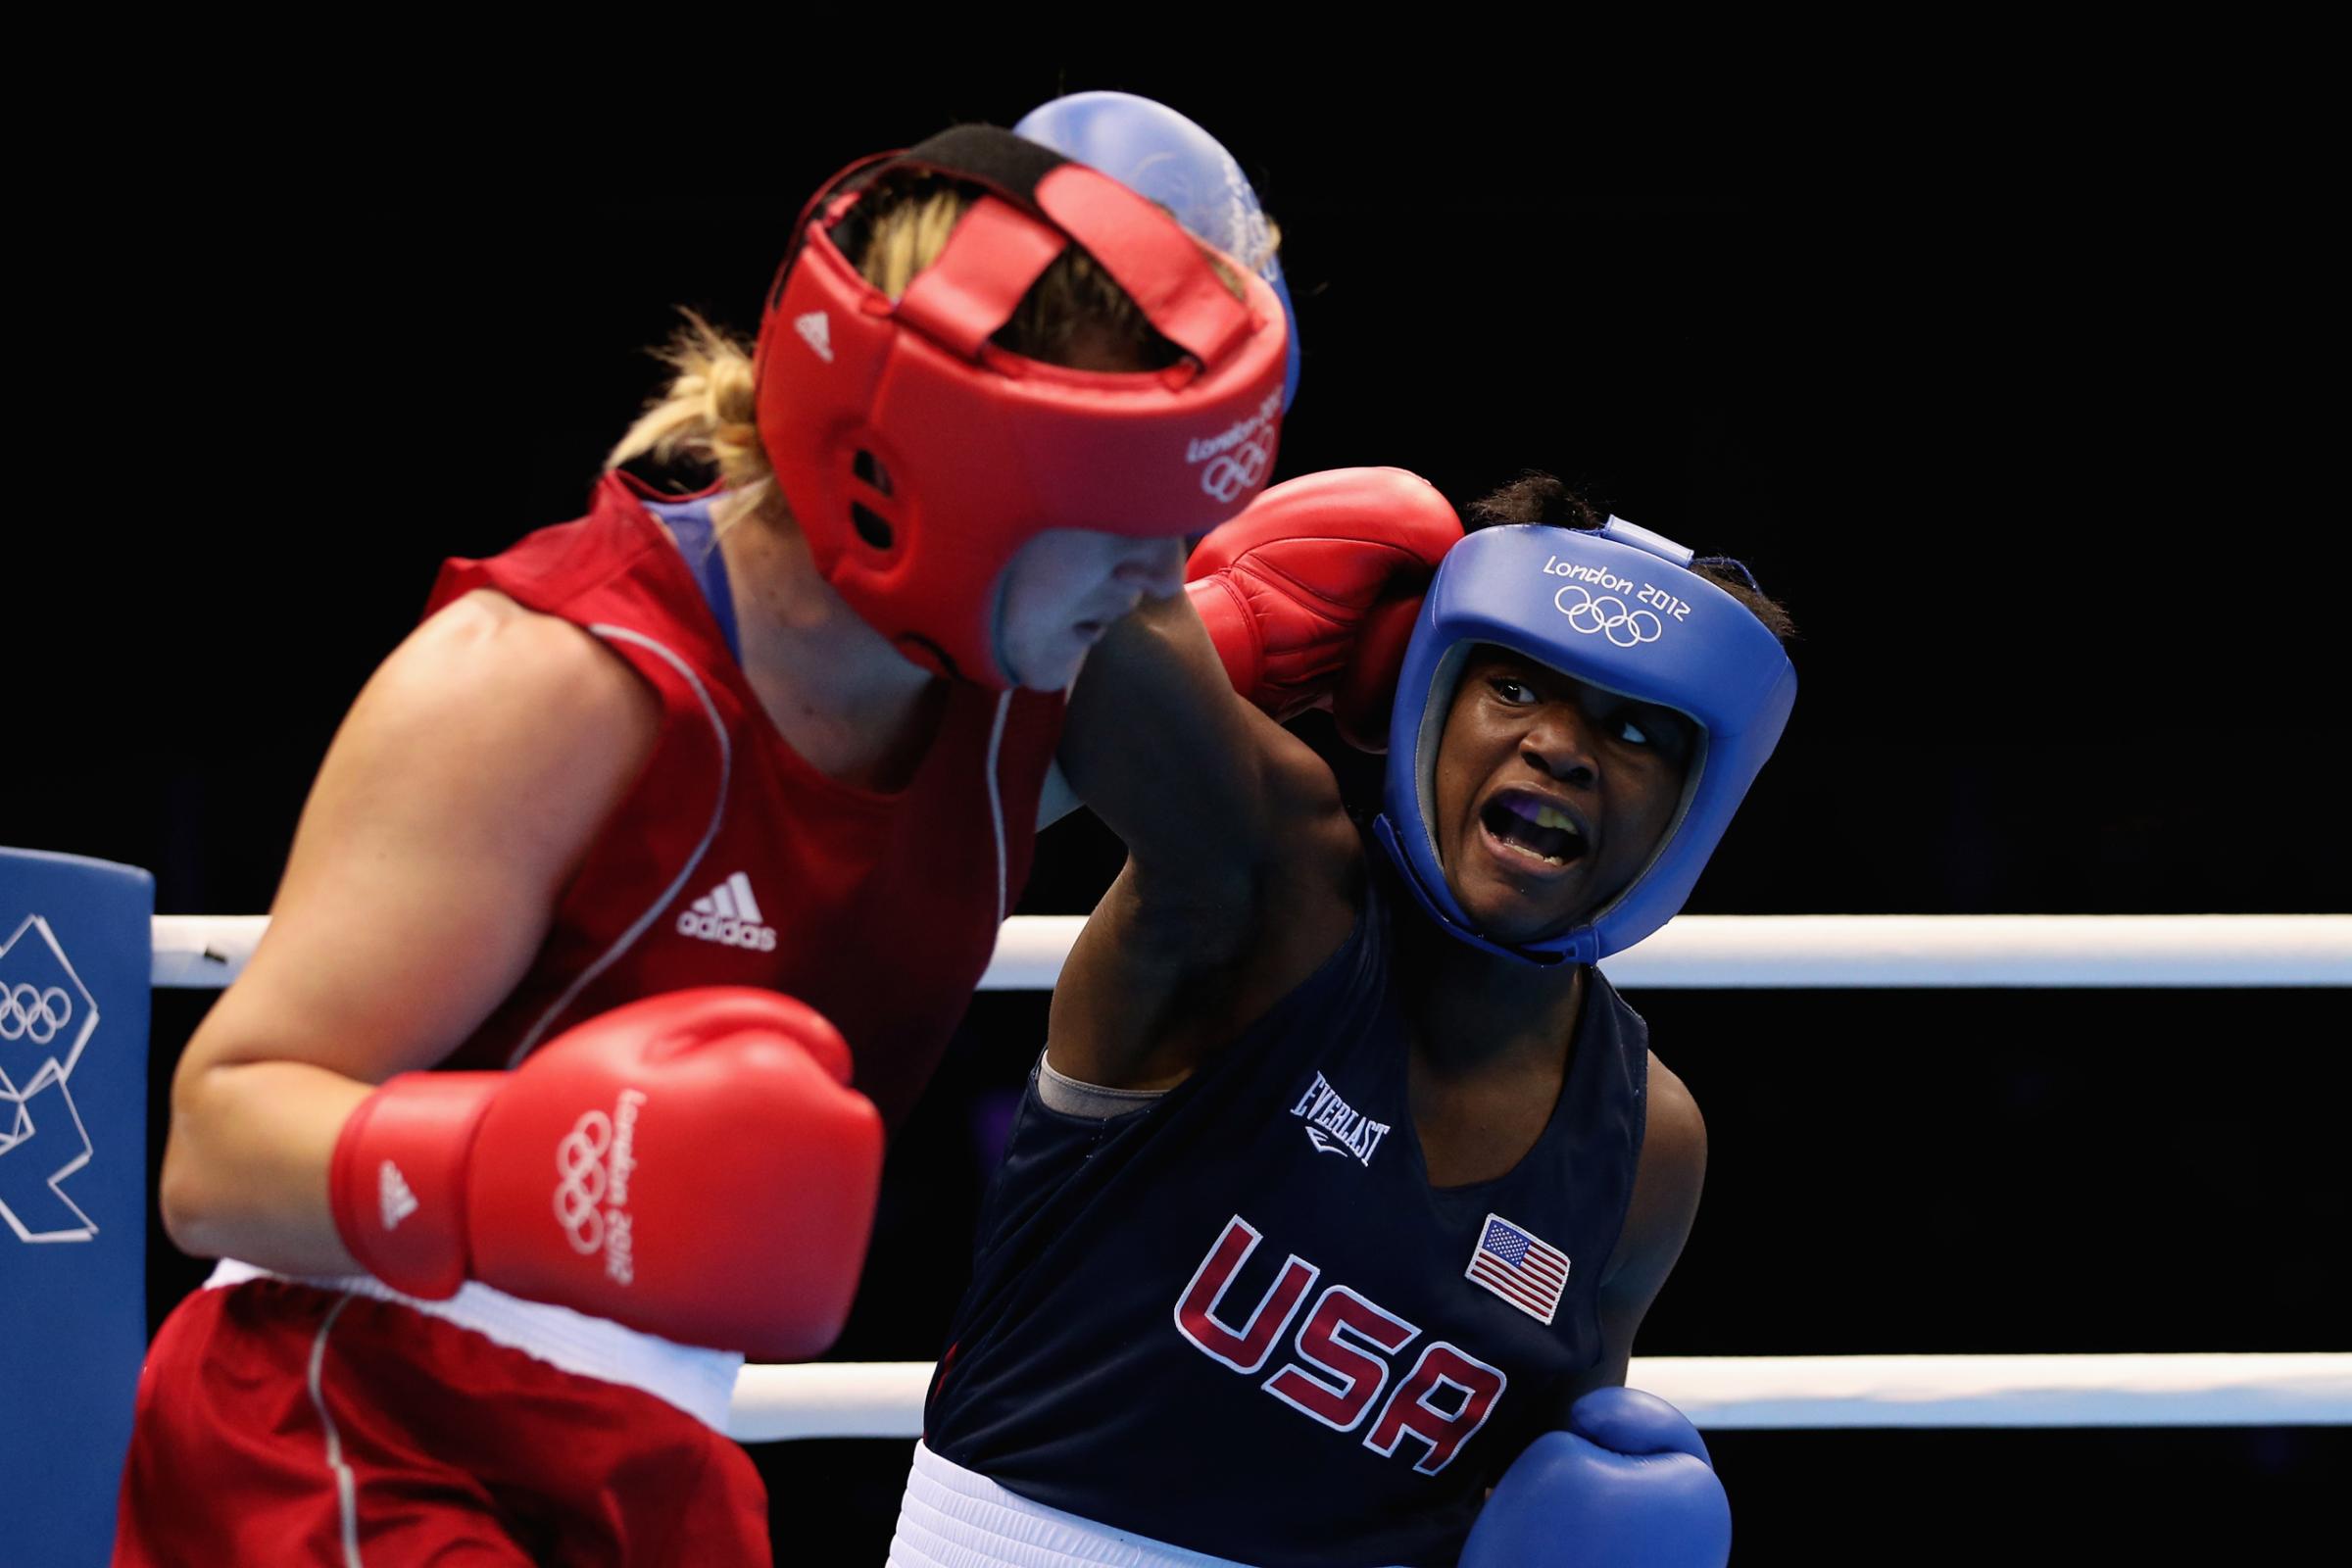 Claressa Shields—The Flint, Mich., native won gold in the 165-lb. division in 2012 and is favored to do it again in Rio.